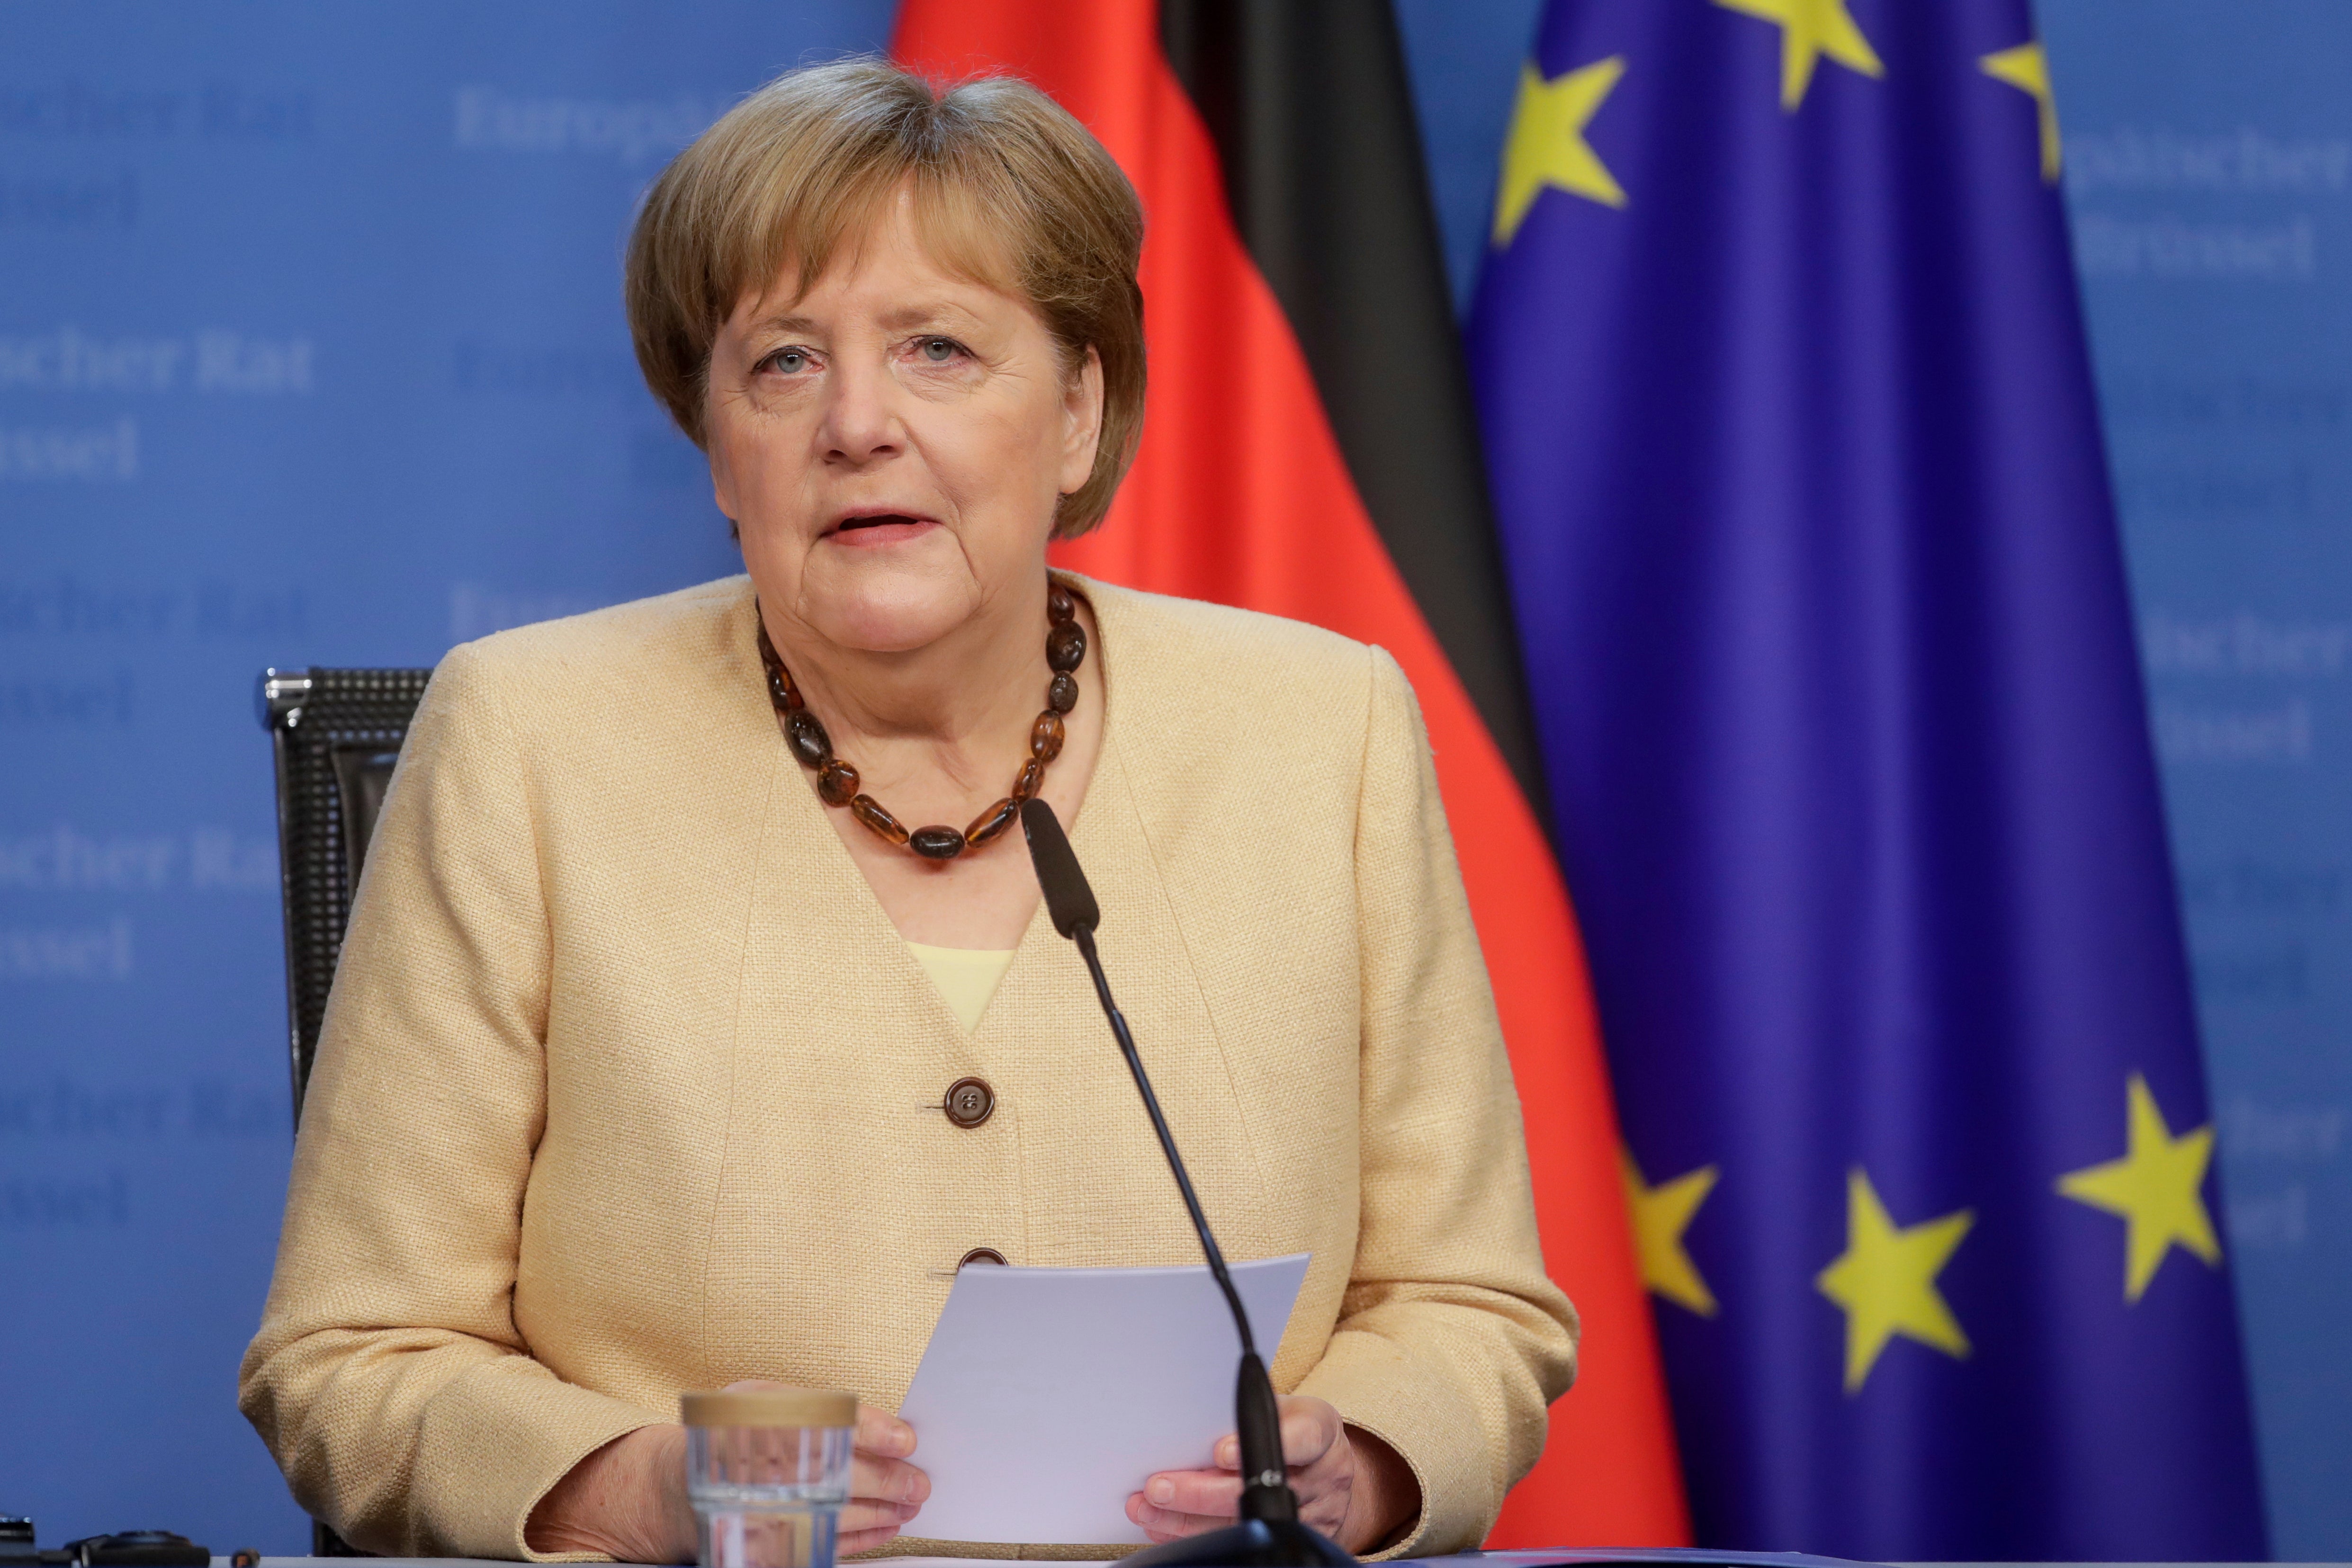 ‘Angela Merkel wants to quarantine UK travellers, but a decision taken anywhere is a decision affecting lives everywhere’